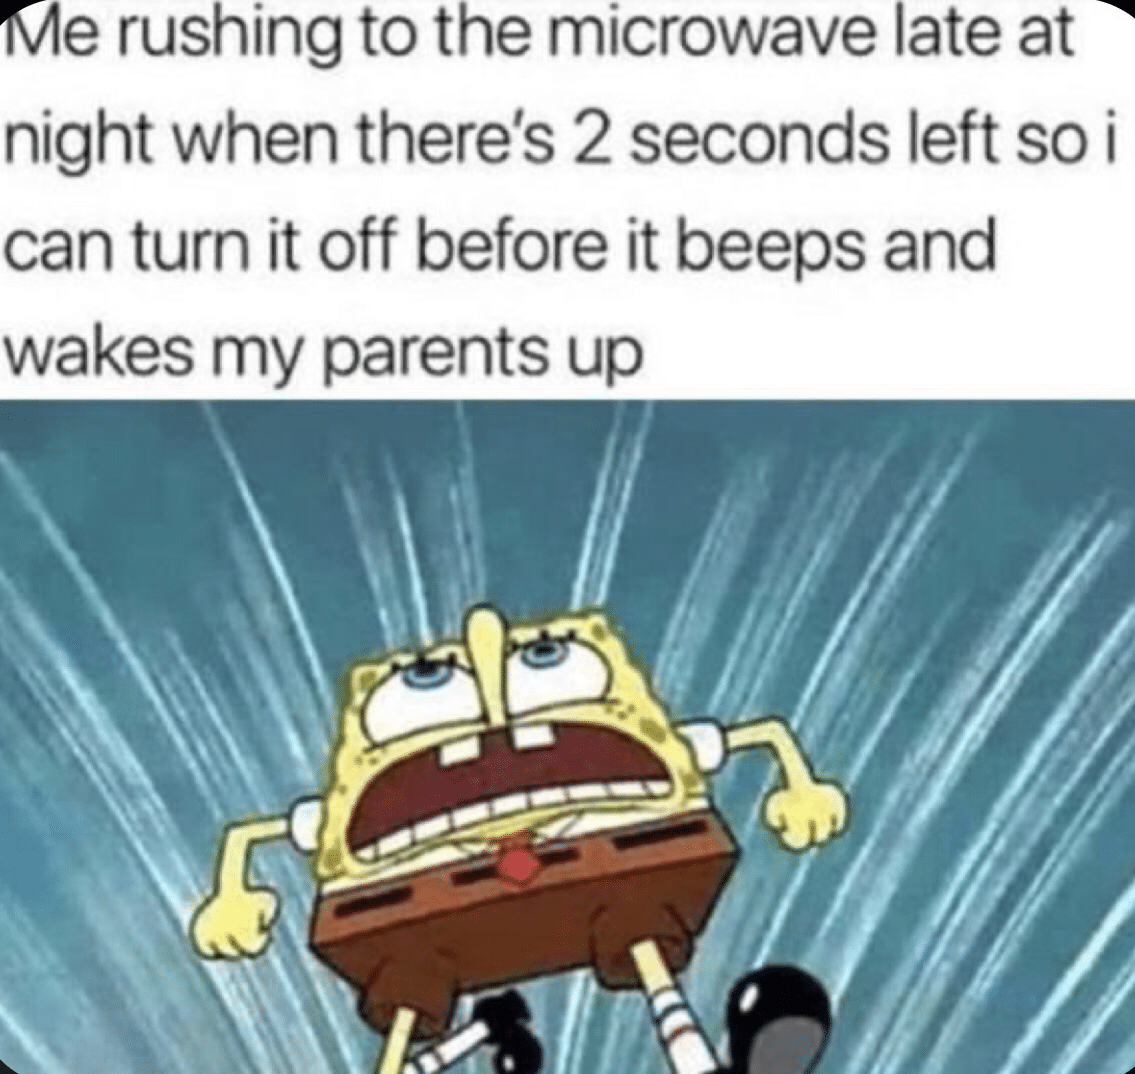 spongebob spongebob-memes spongebob text: Me rushing to the microwave late at night when there's 2 seconds left so i can turn it off before it beeps and wakes my parents up 